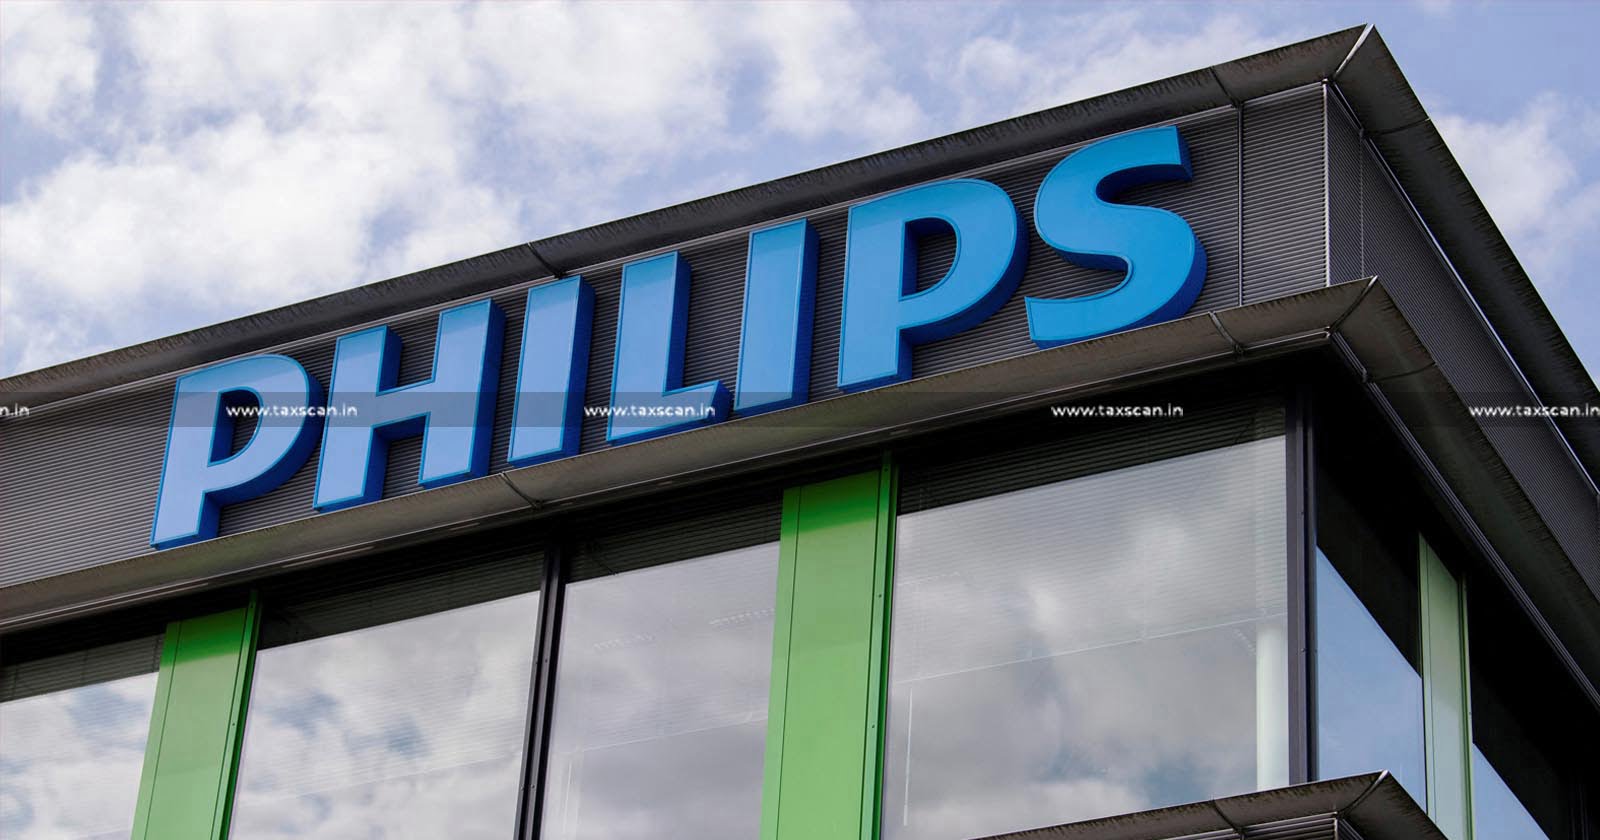 CA Vacancy in Philips - job vacancy in Philips - job in Philips - TAXSCAN